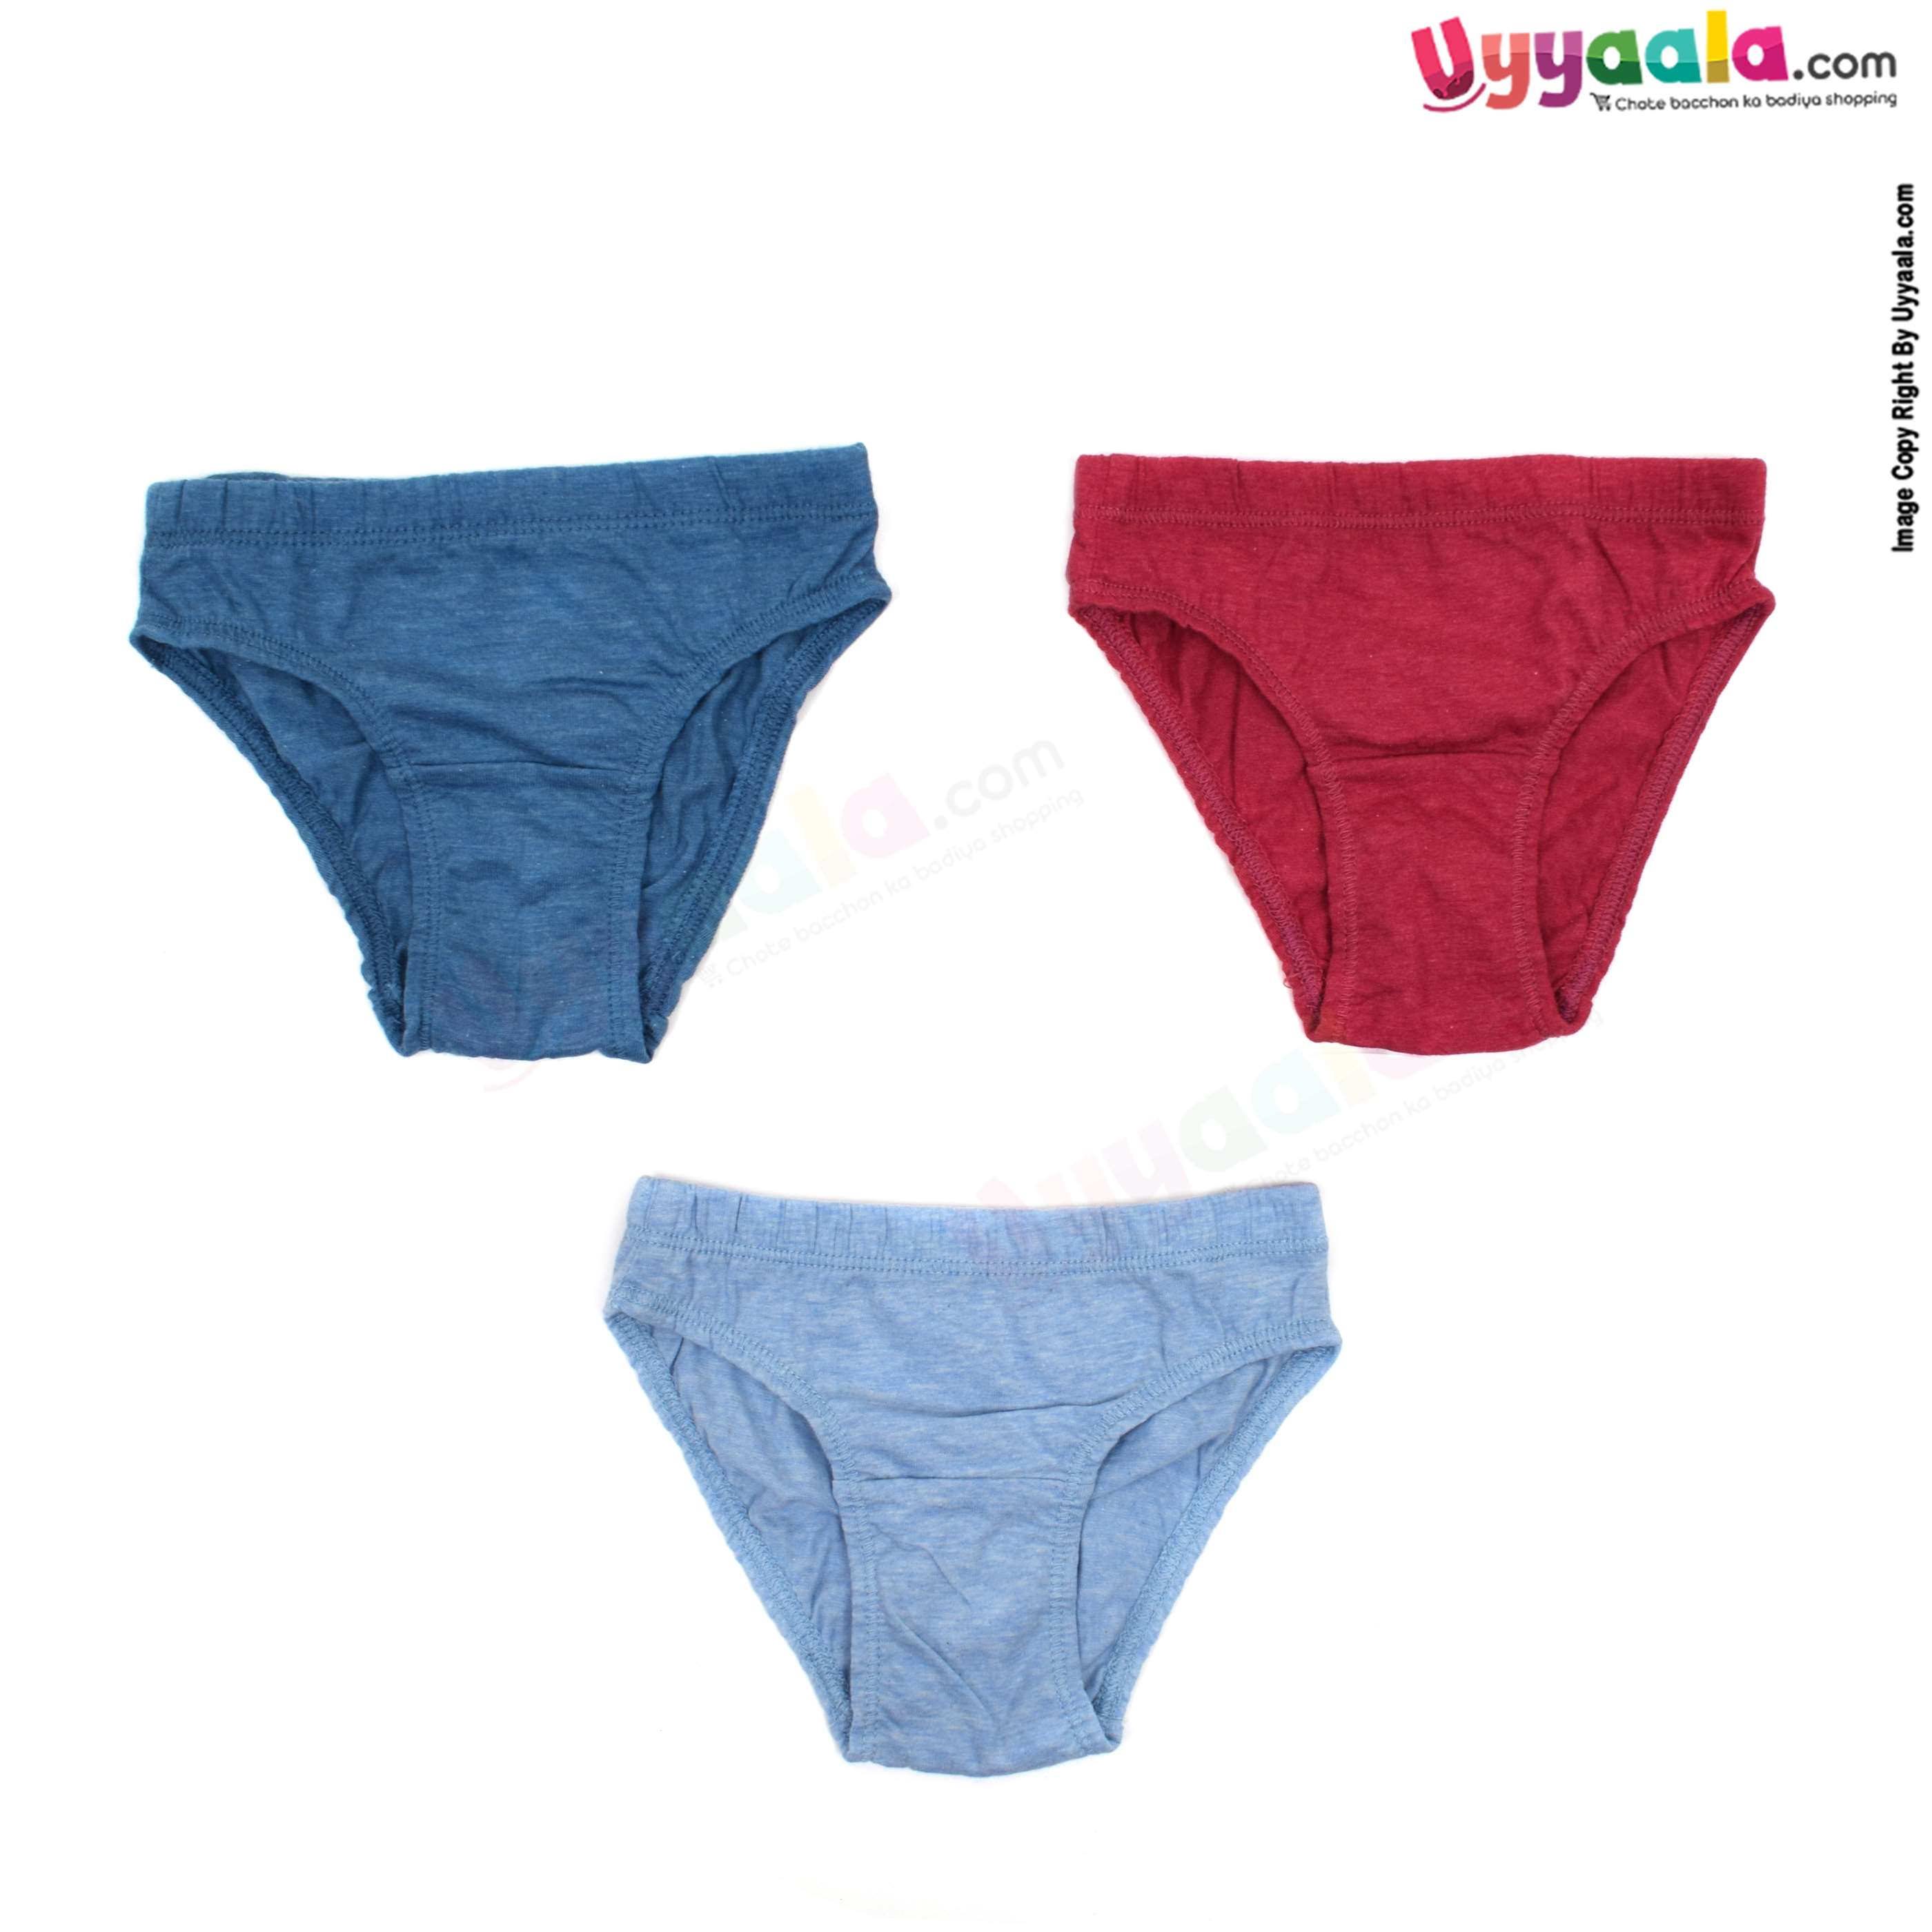 BLOSSOM JUNIOR Cathy panty, premium cotton for kids pack of 3 - blue & red , 6 -12 months